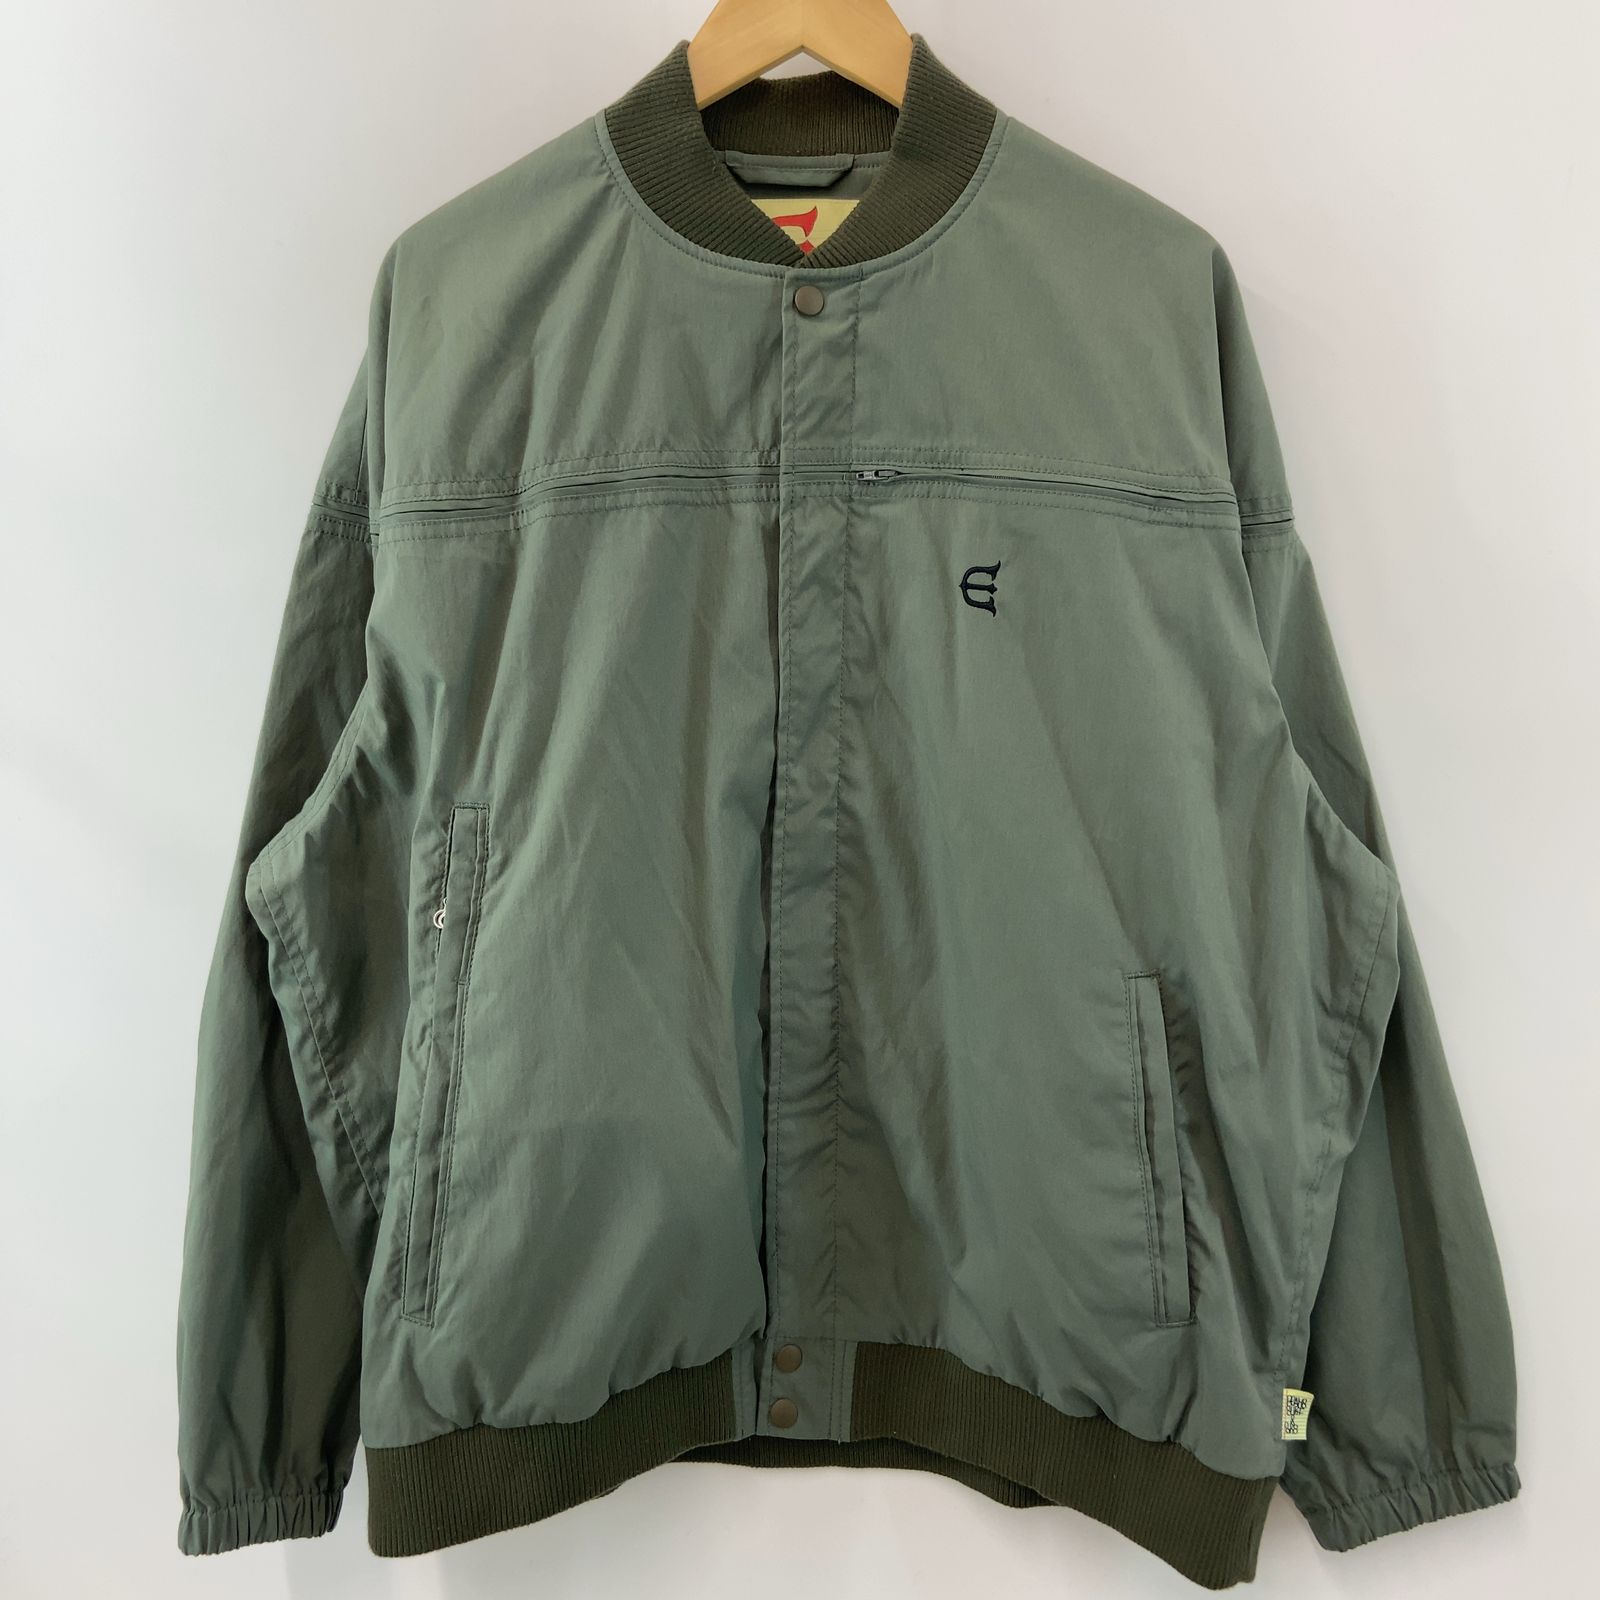 【Evisen skateboards エビセンスケートボード】【BEAMS×SSZ/EVIRBY JACKET/L/ポリエステル/カーキ】